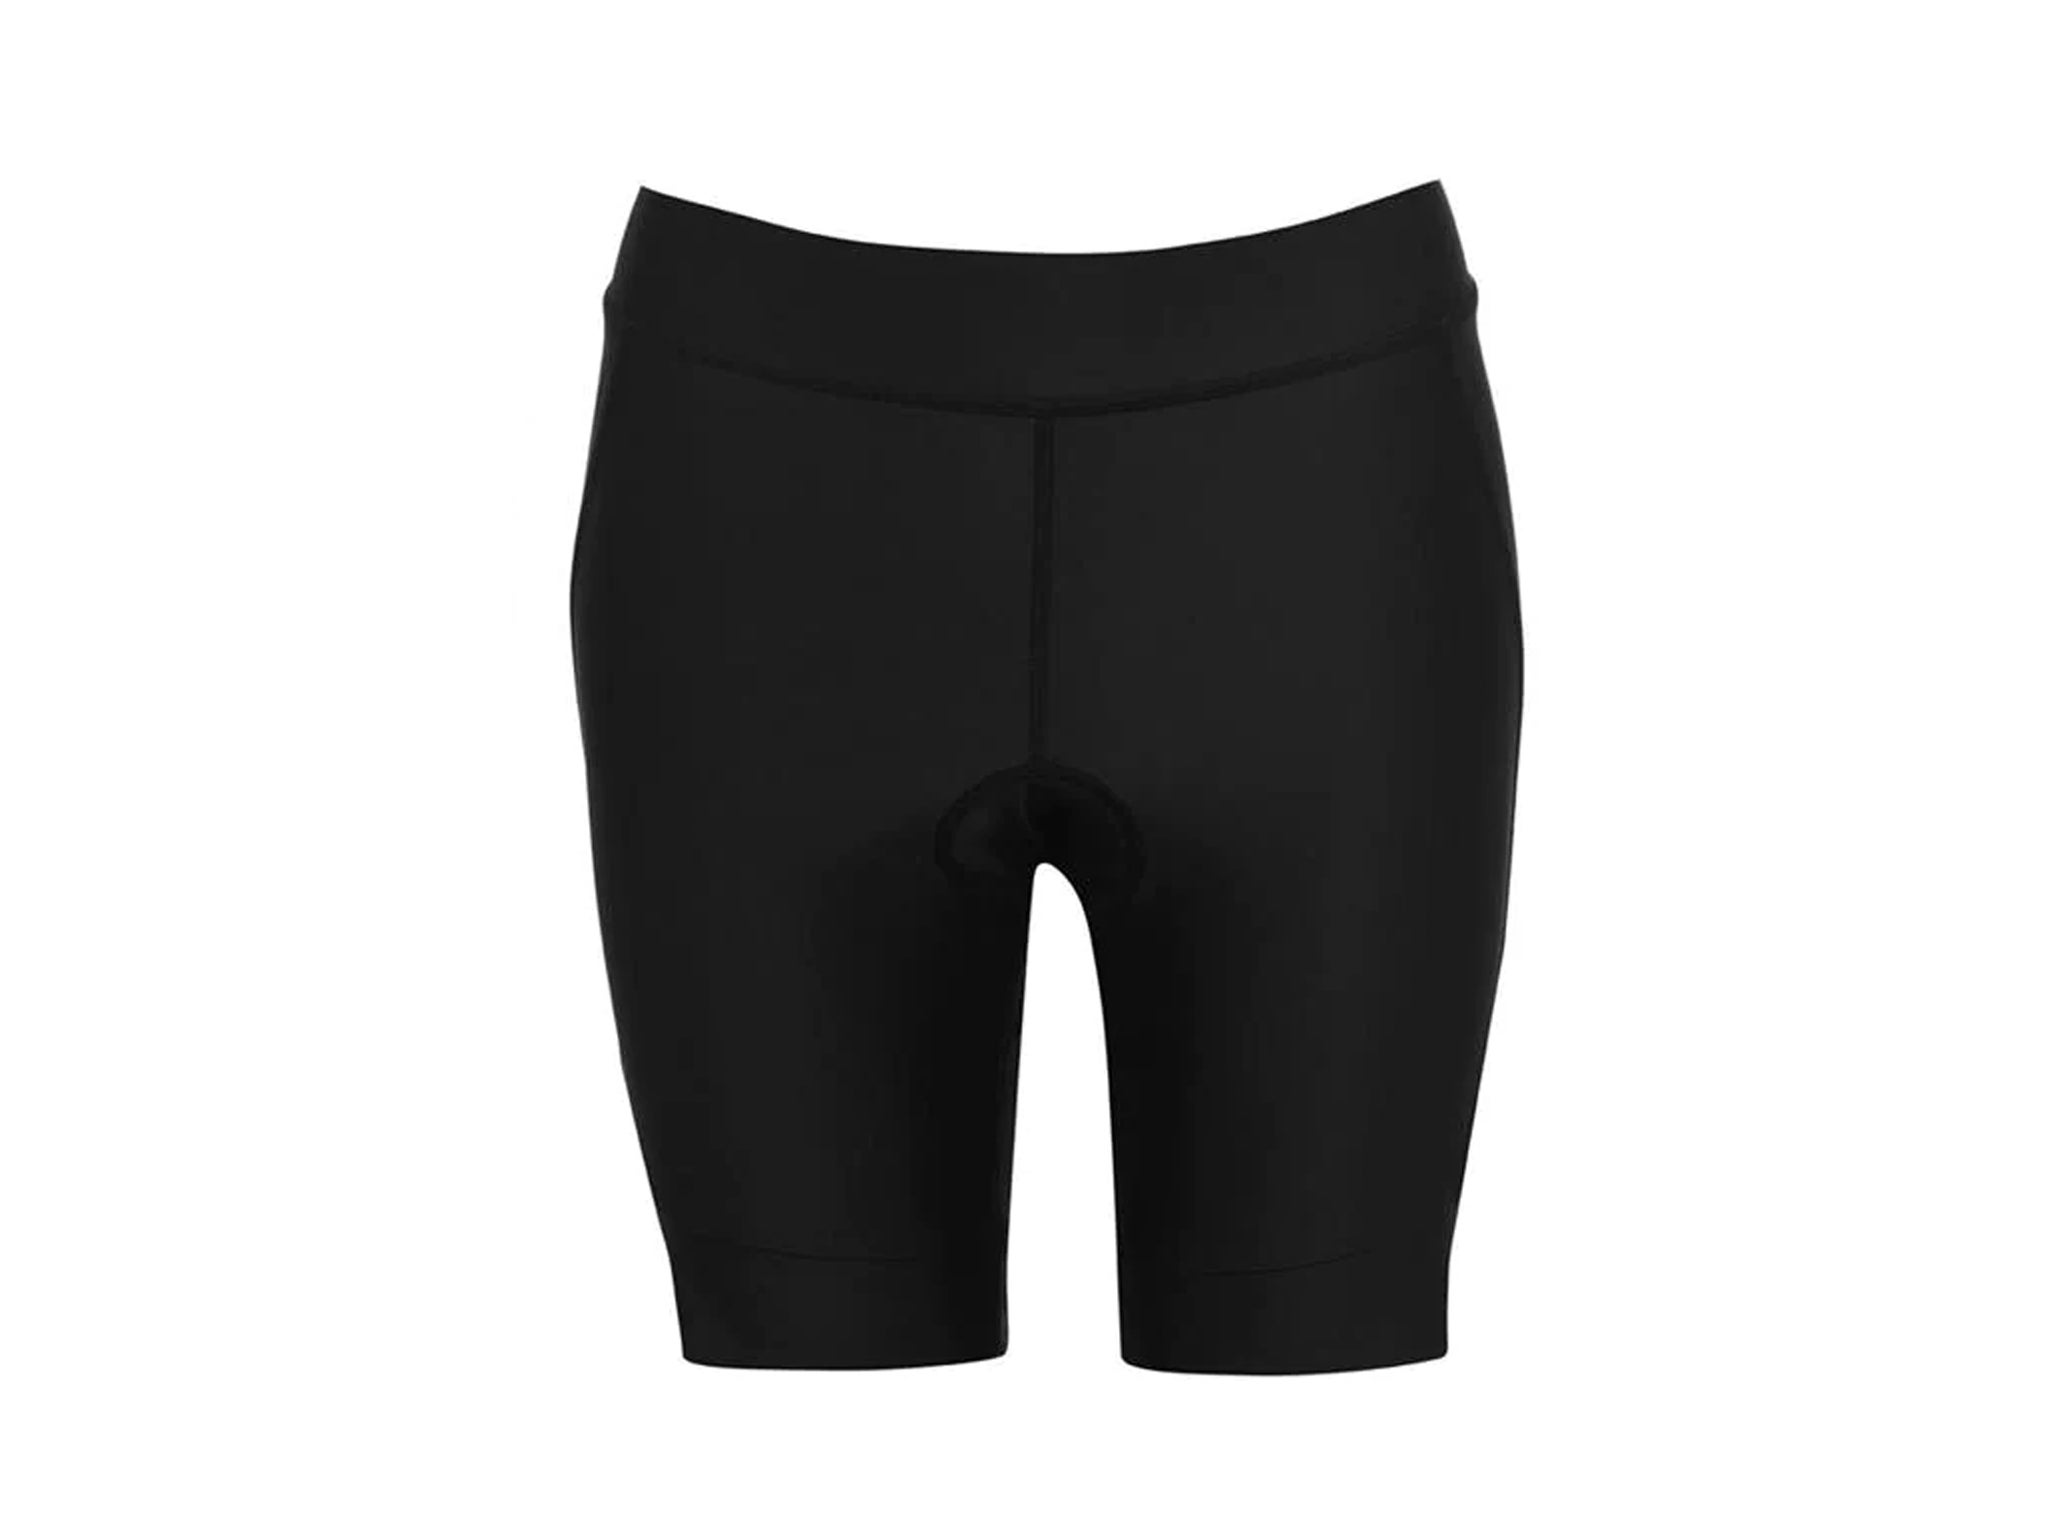 Girls Cycling Shorts Sports Dance Shorts Leggings for Kids Under Dress 3 Pack Bicycle Safe Active Shorts Underwear 